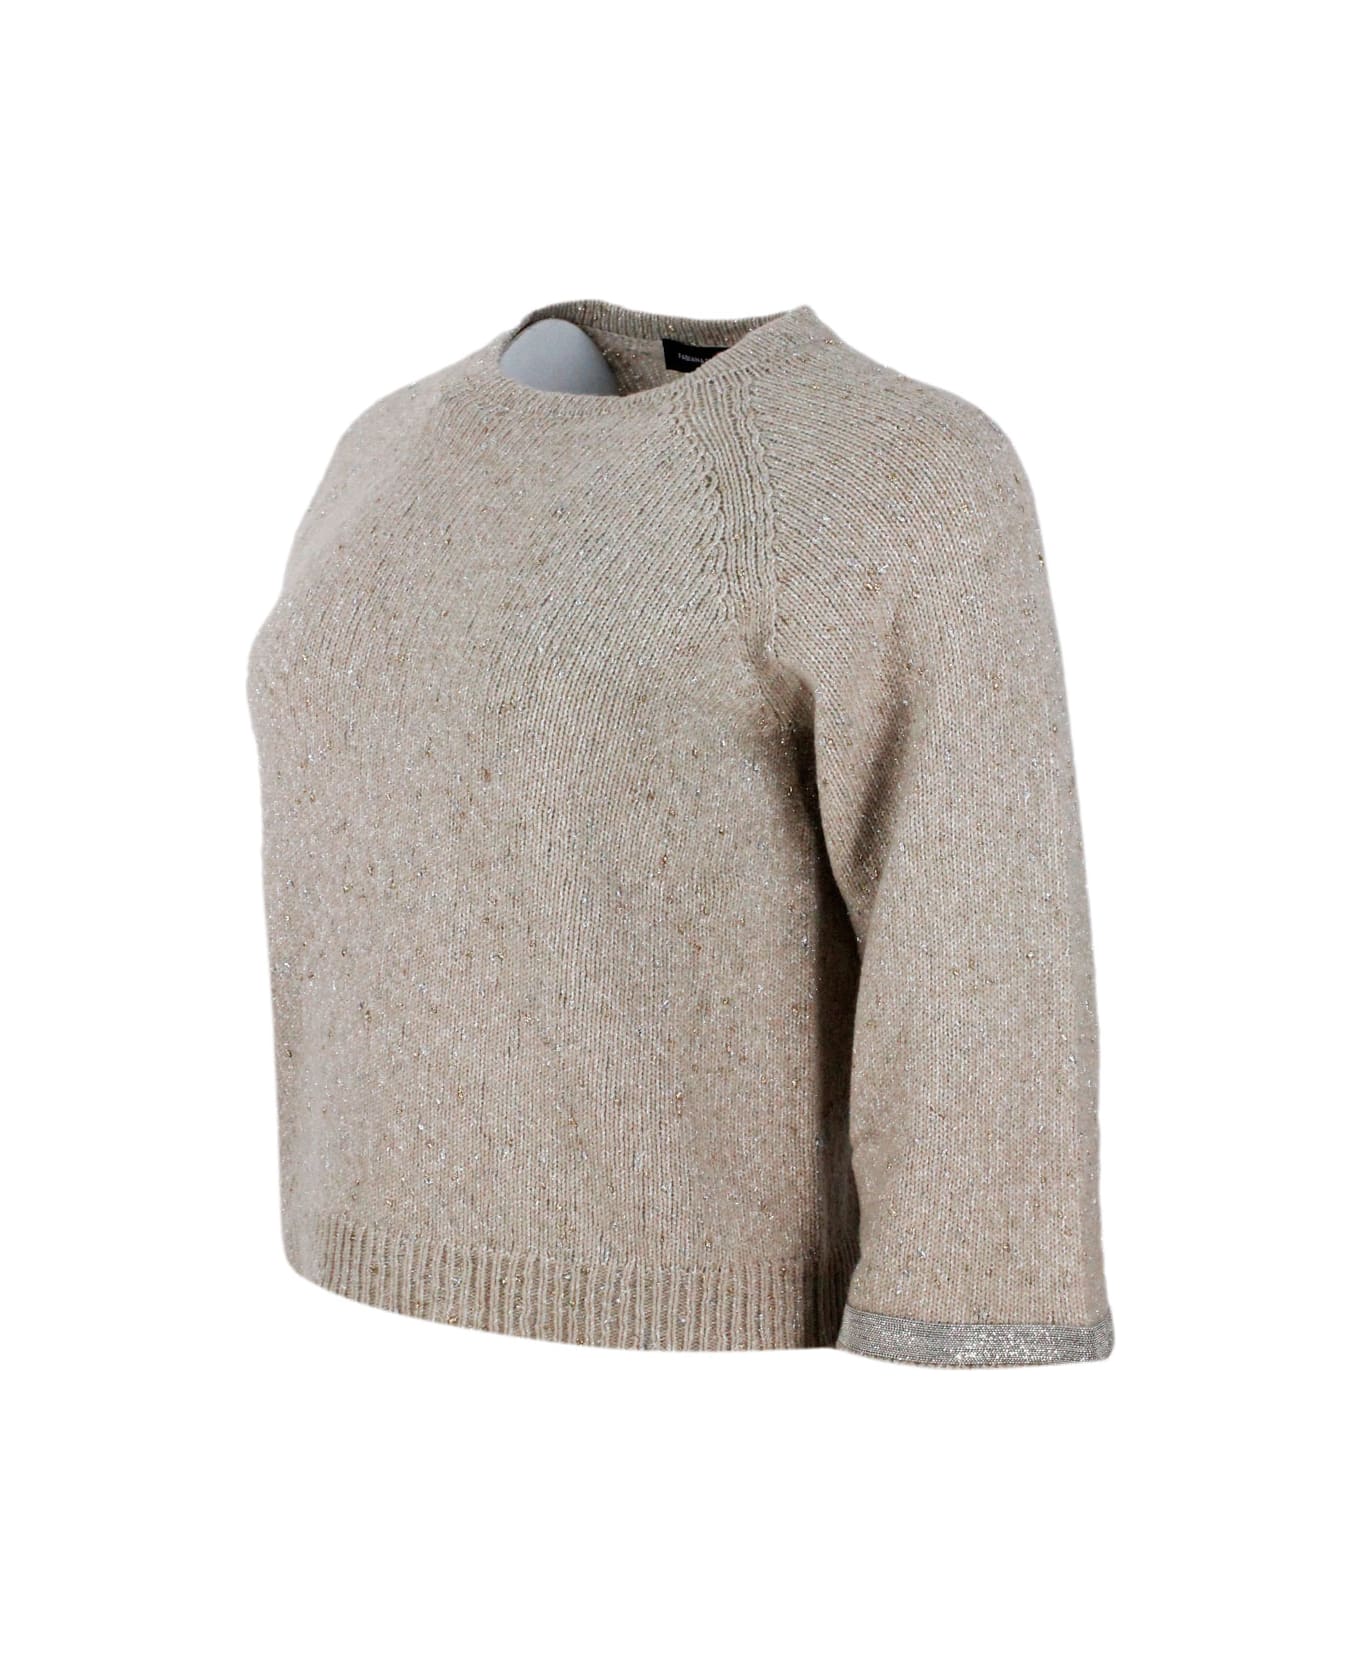 Fabiana Filippi Crewneck Sweater In Donegal Lamè Yarn With 3/4 Sleeves Embellished With Brilliant Jewel Details On The Sleeves - Beige